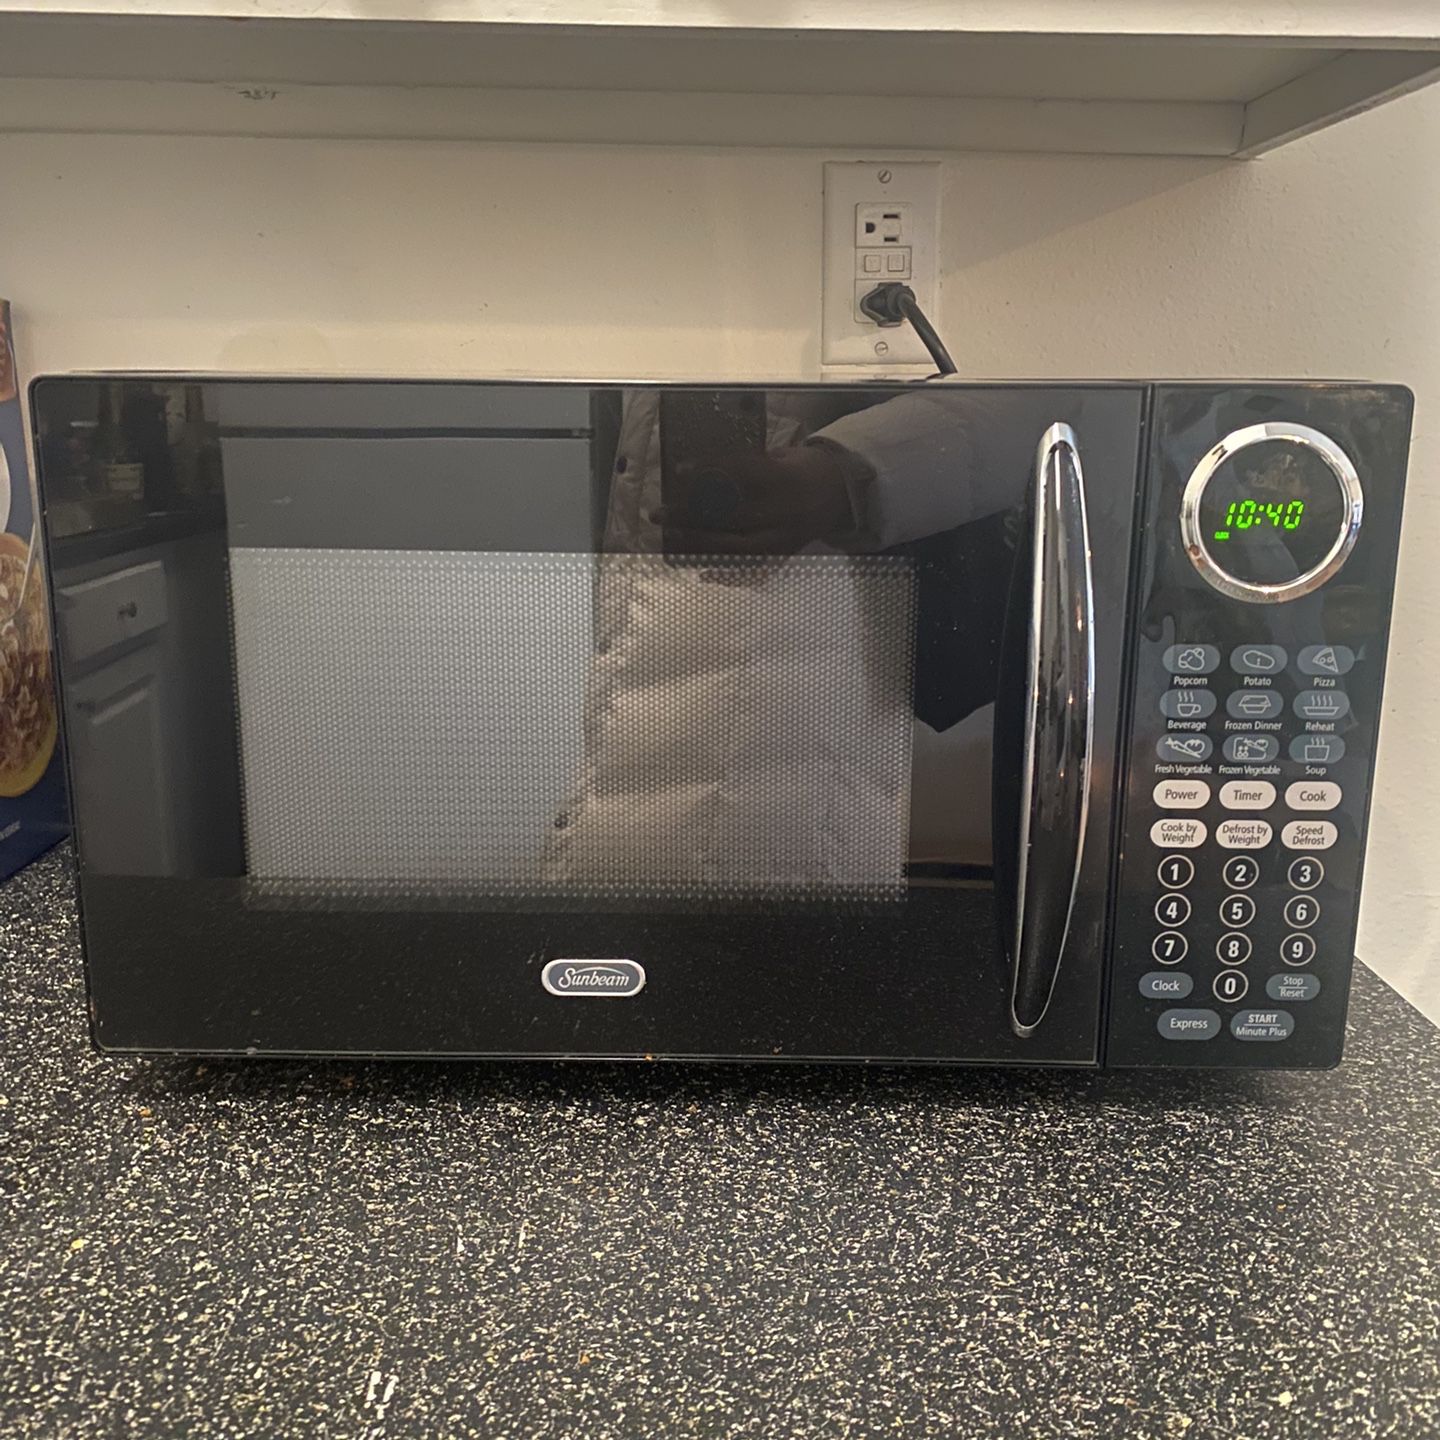 Sunbeam Microwave for Sale in Cary, NC - OfferUp